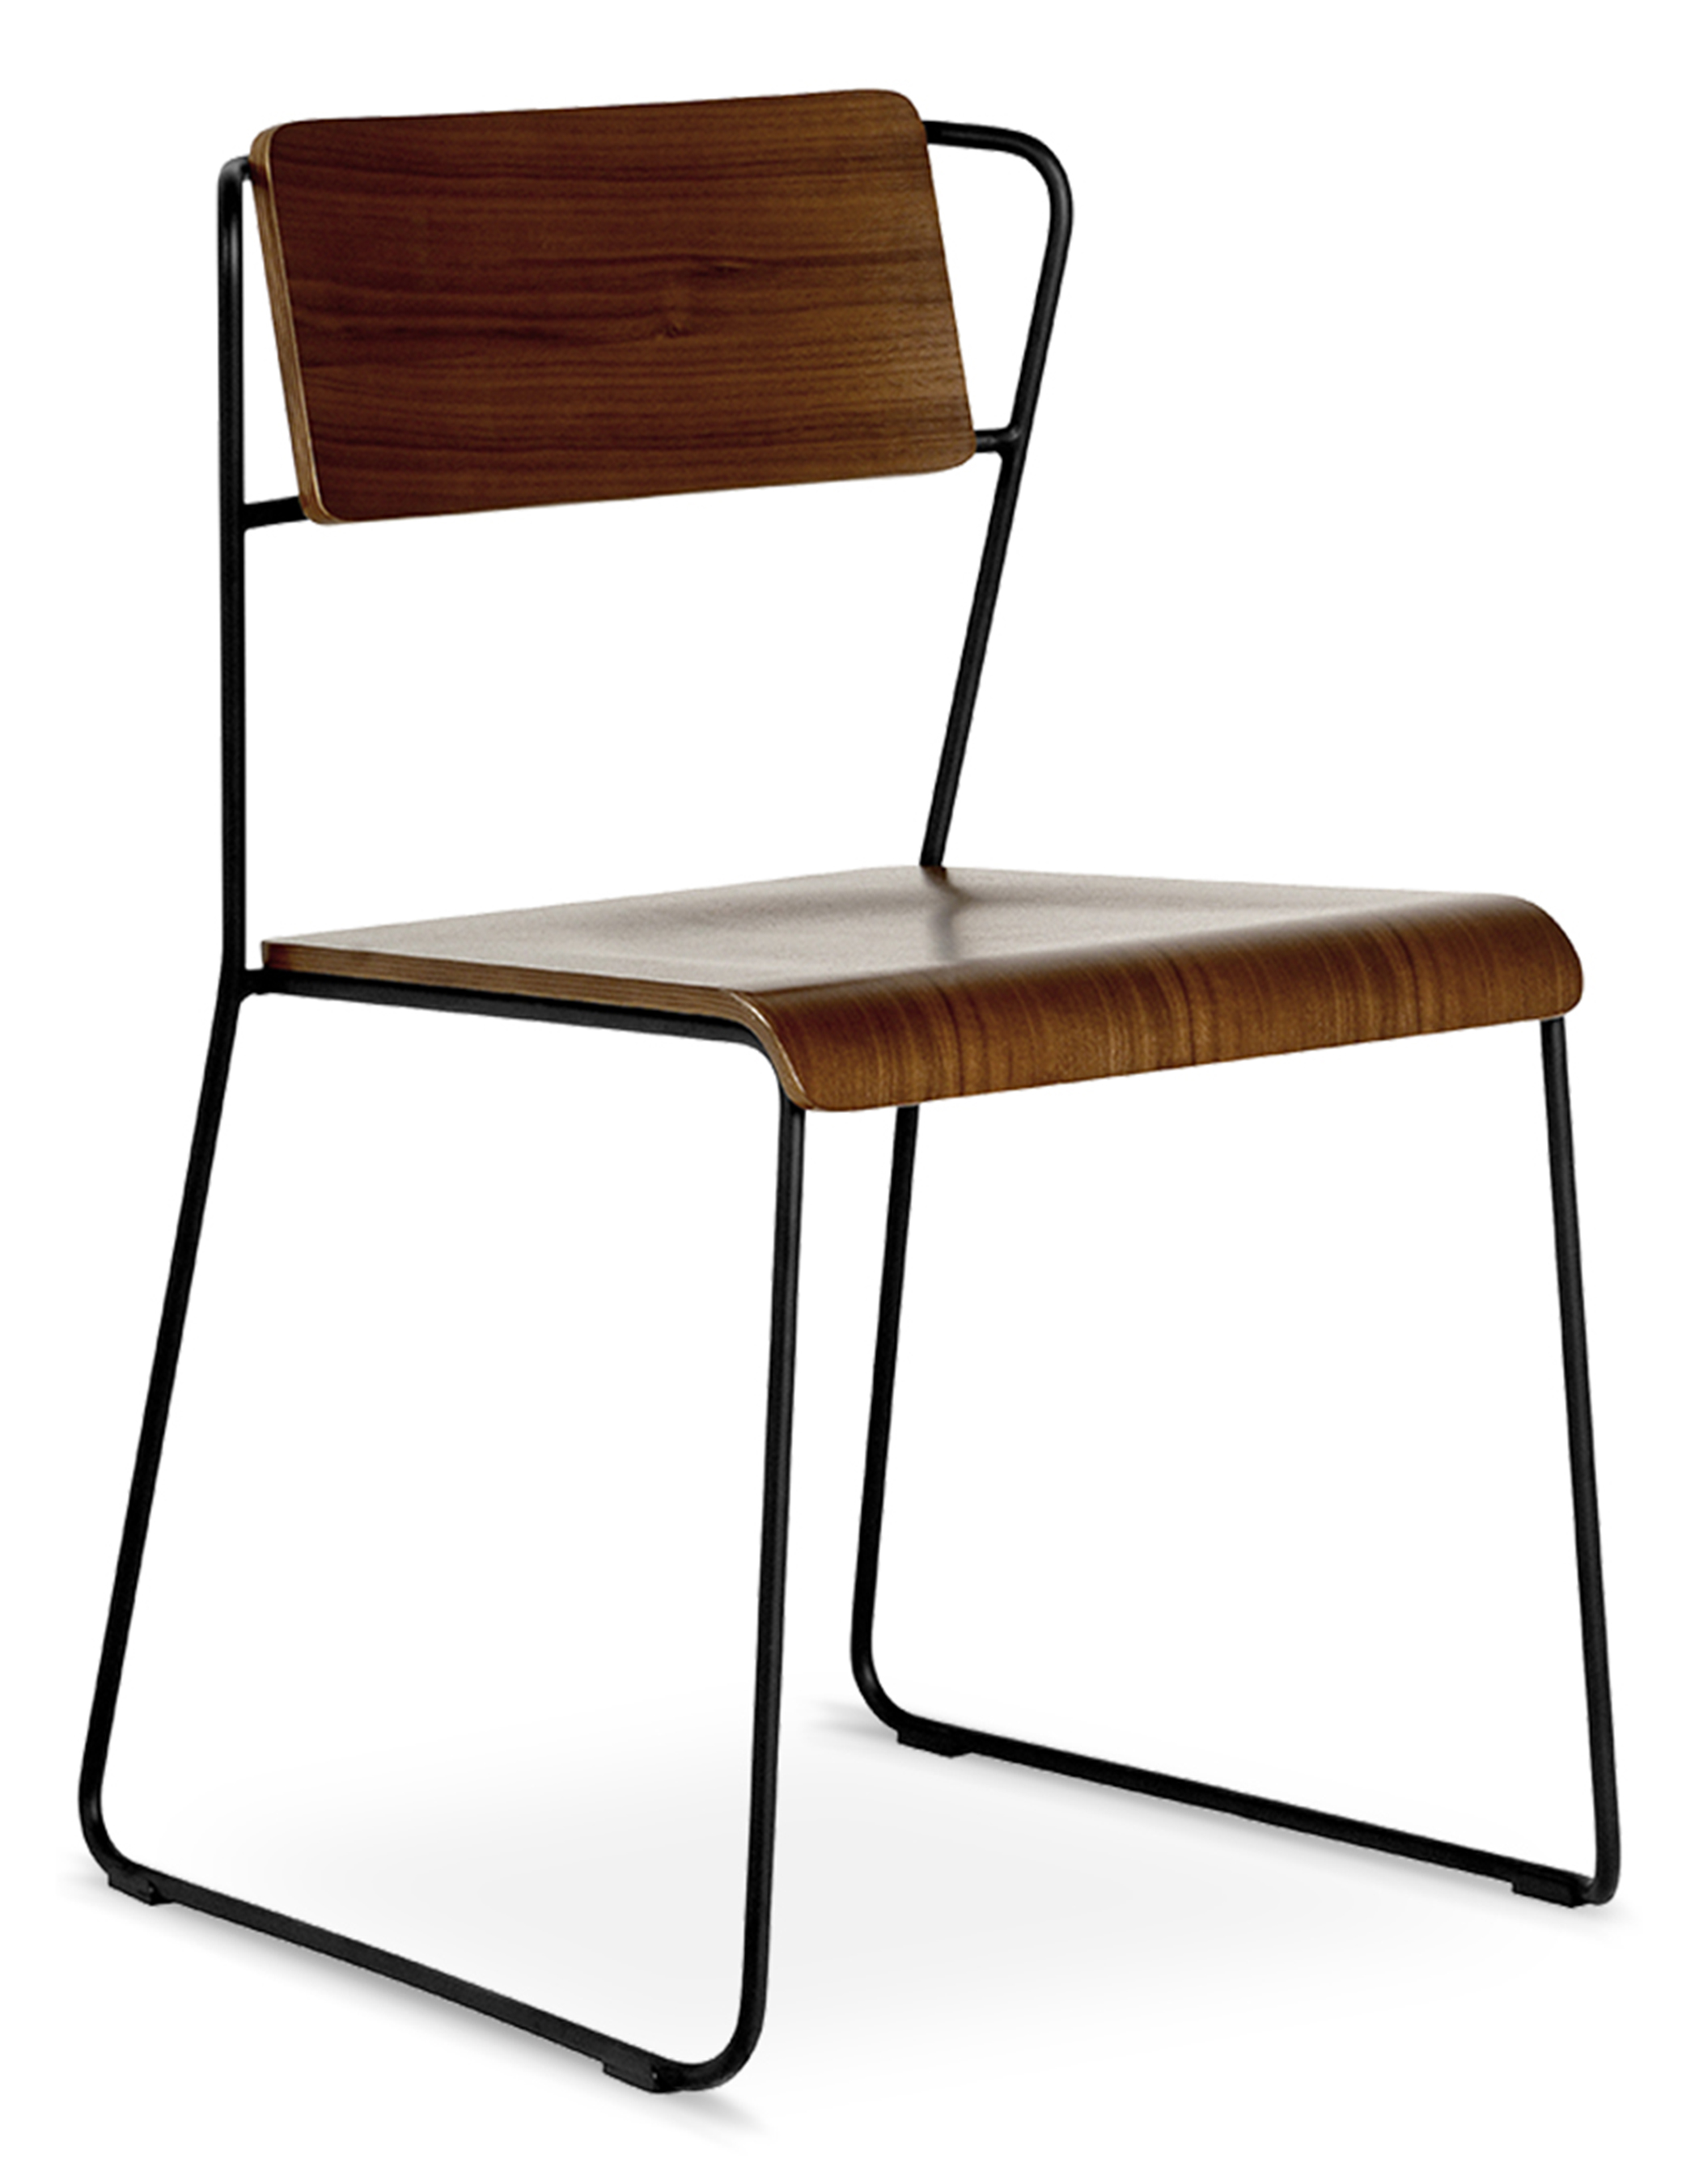 WS - Transit chair - Walnut (Front angle)